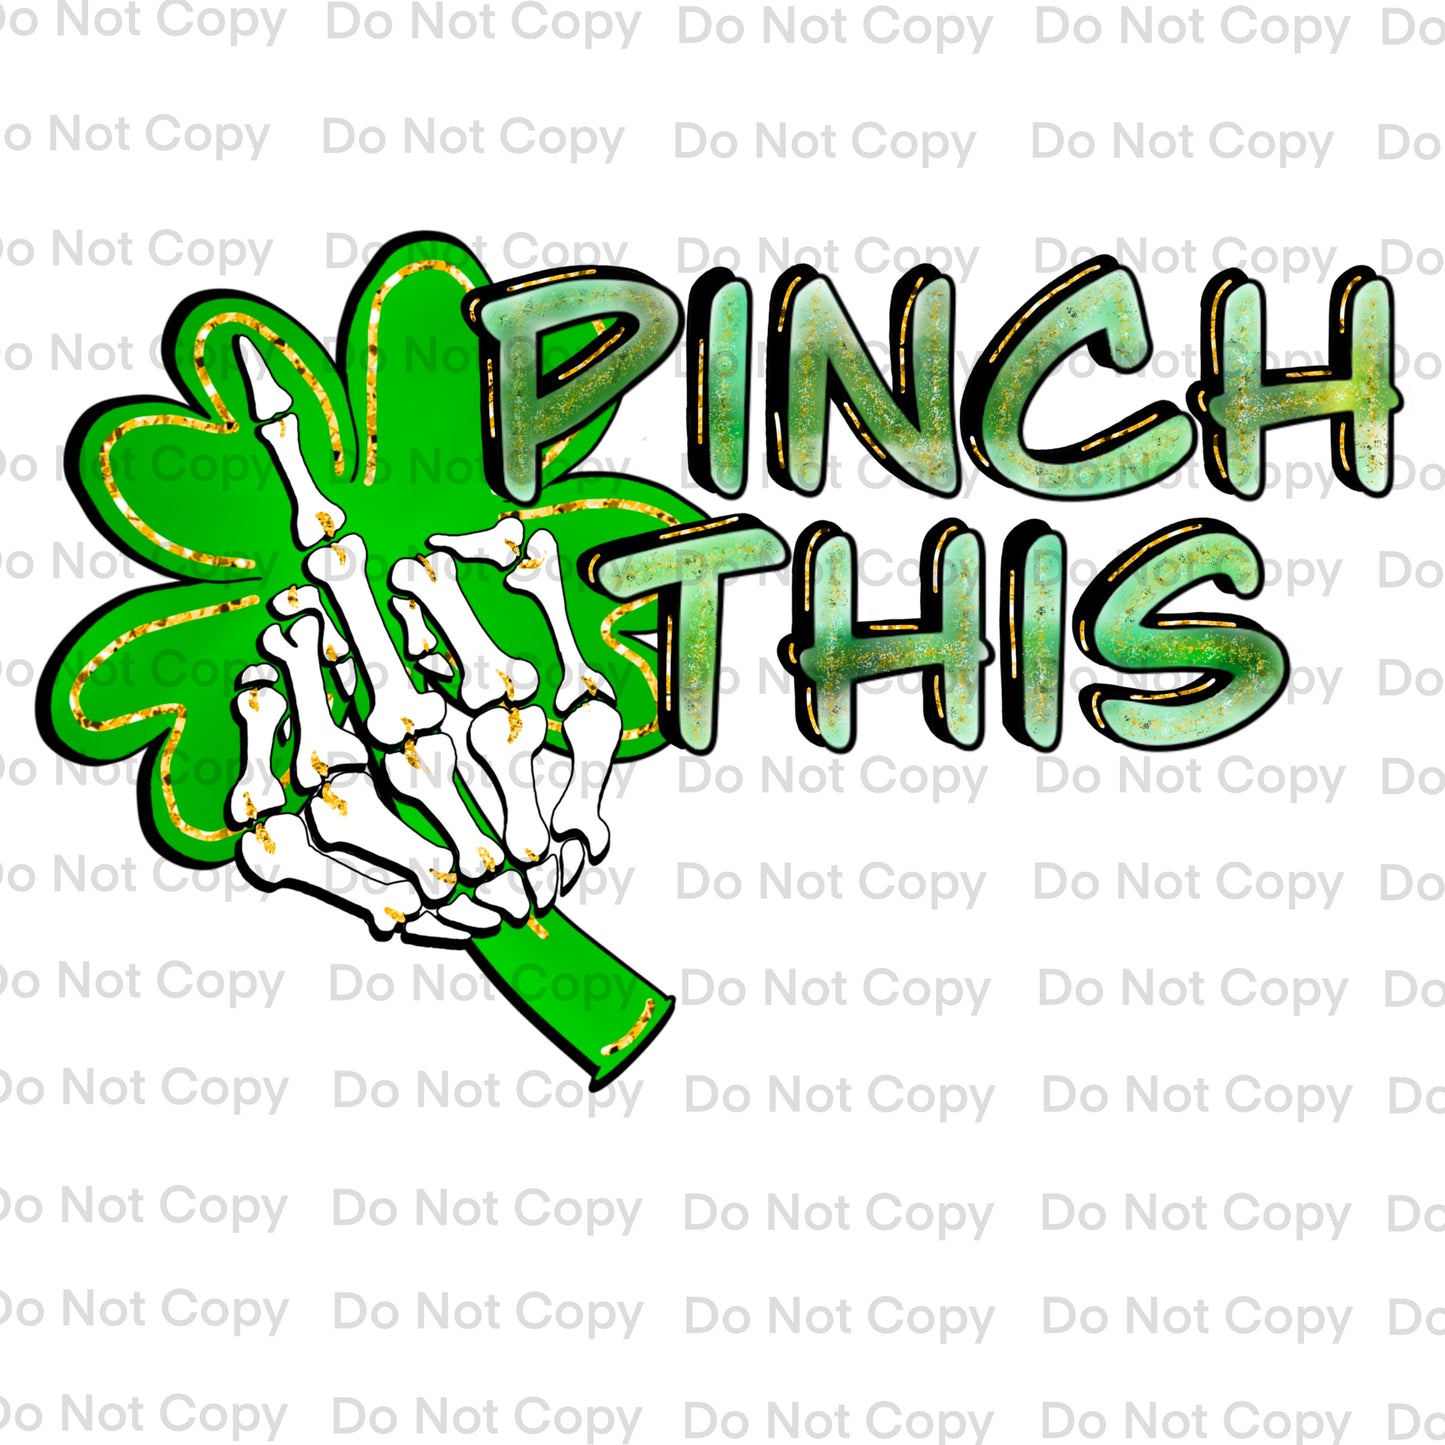 Pinch This